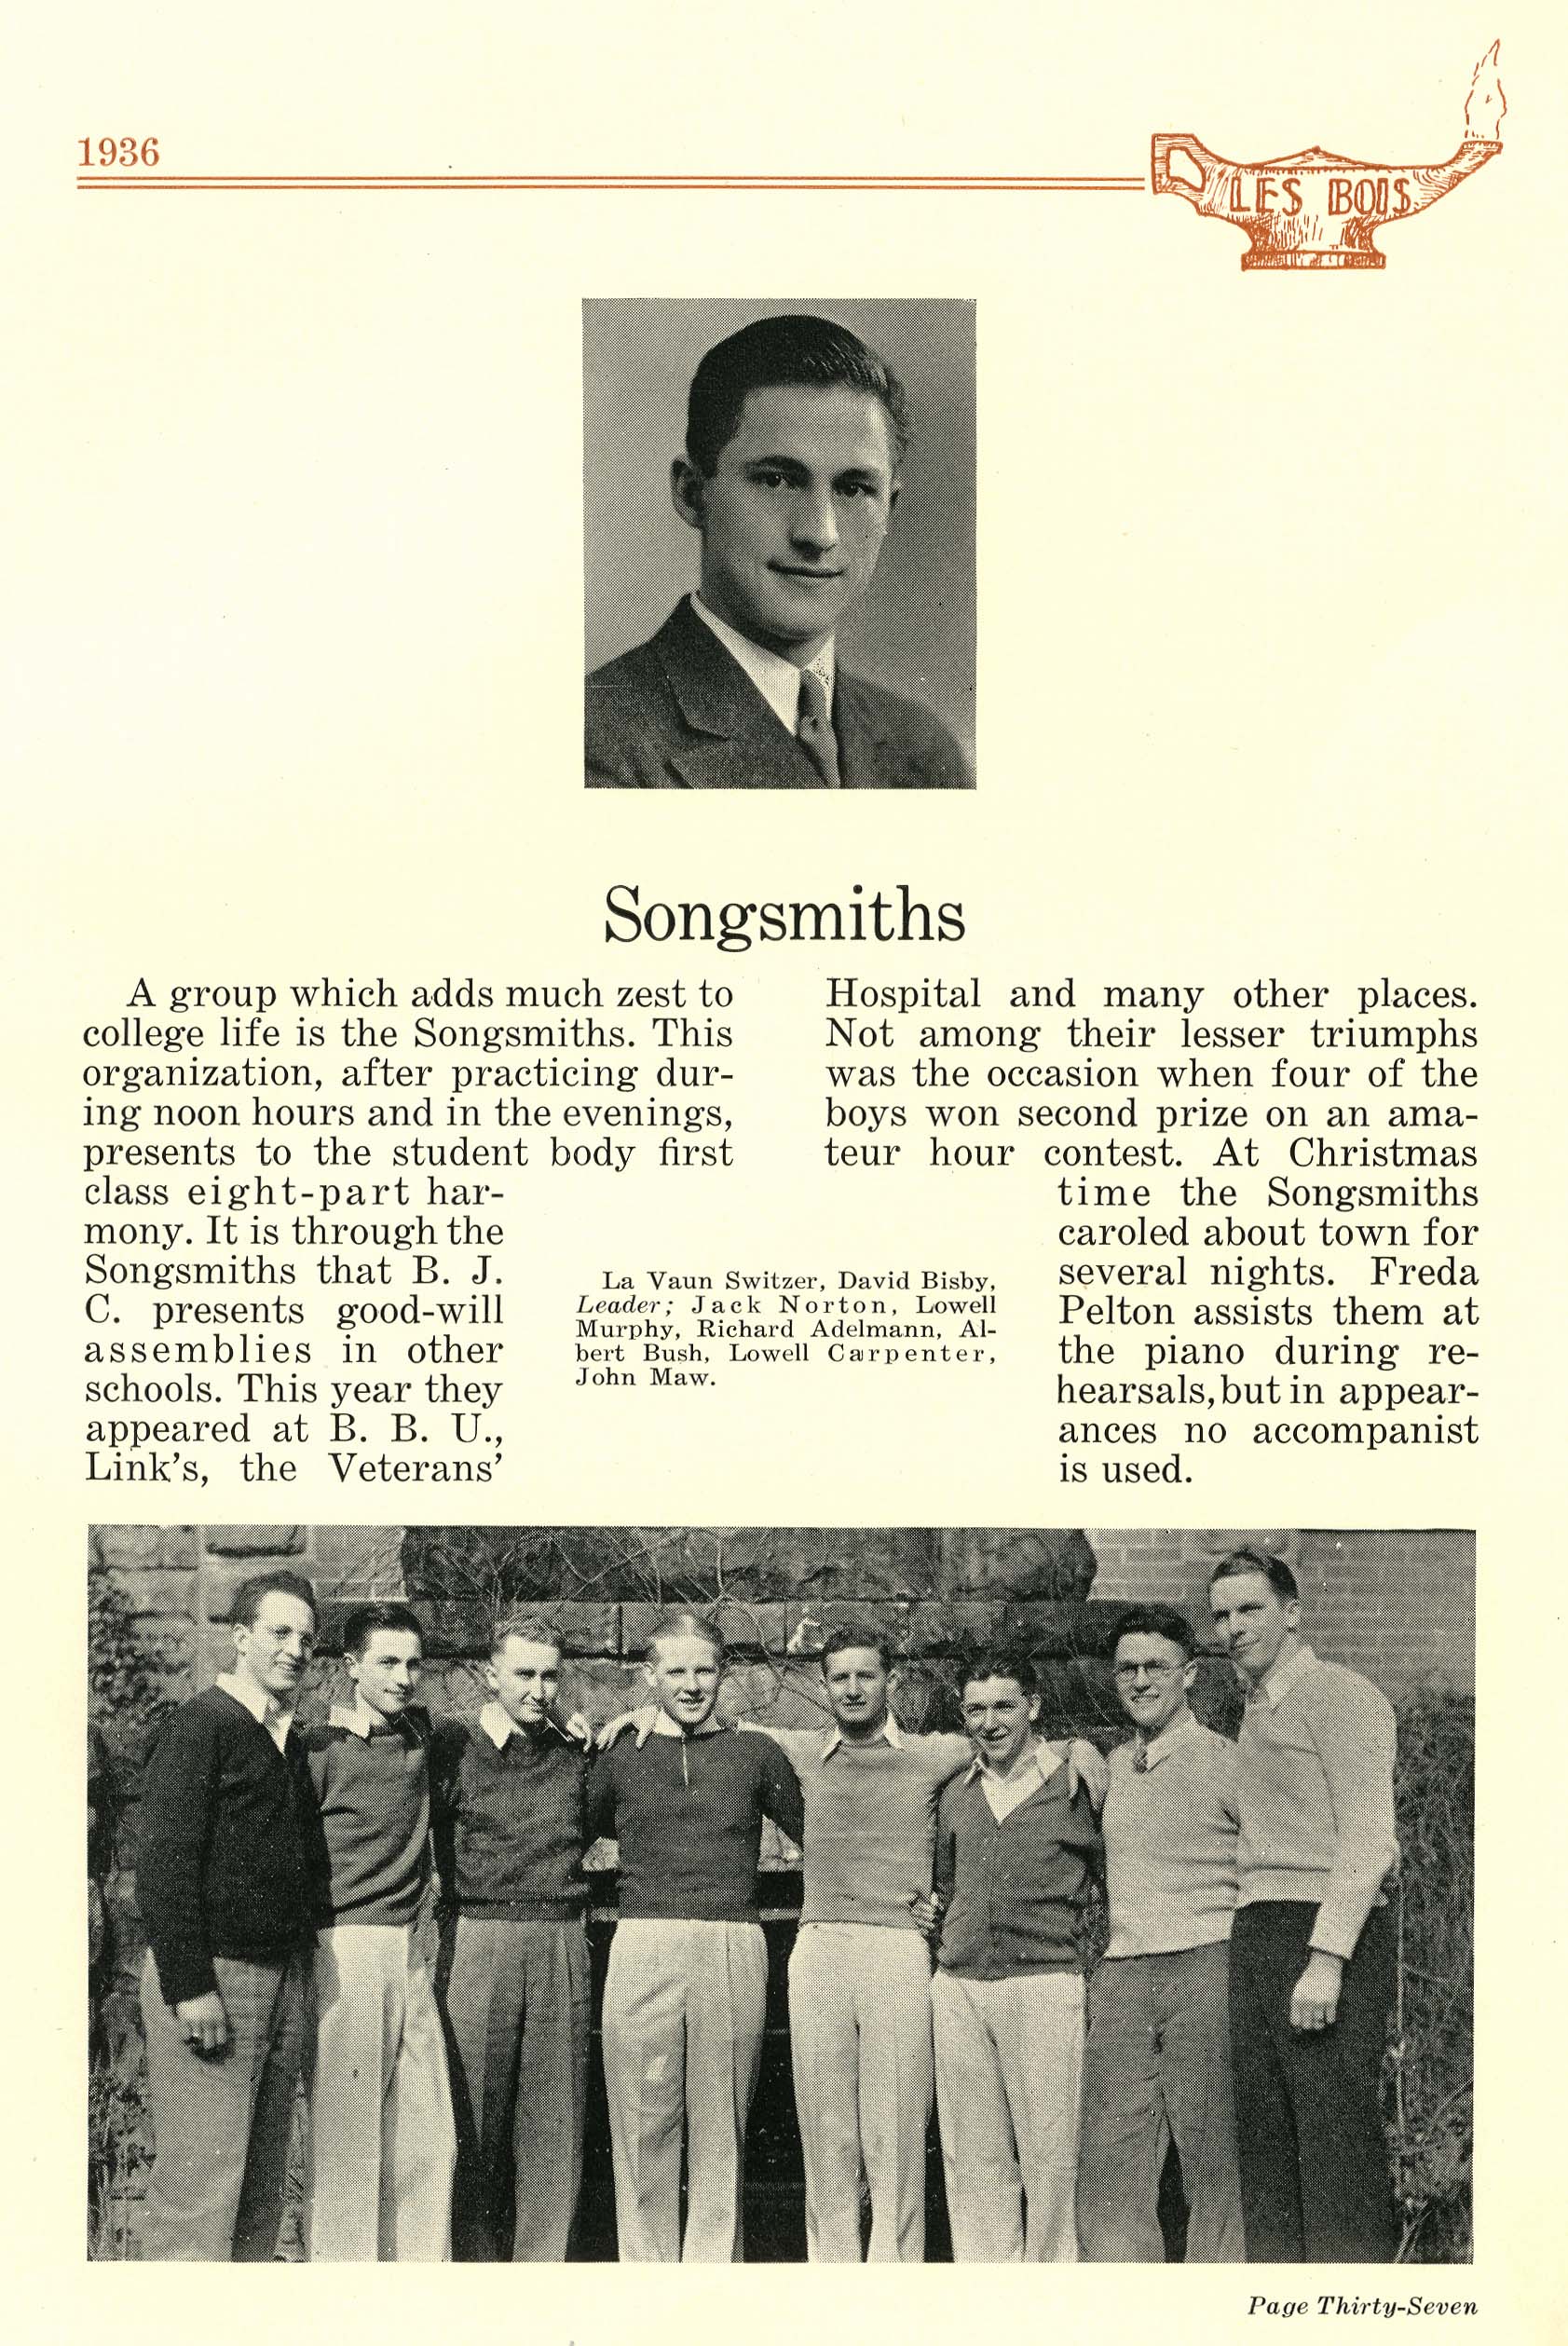 Yearbook pages for the Songsmiths including a portrait photo of a single student and a group photo of the Songsmiths